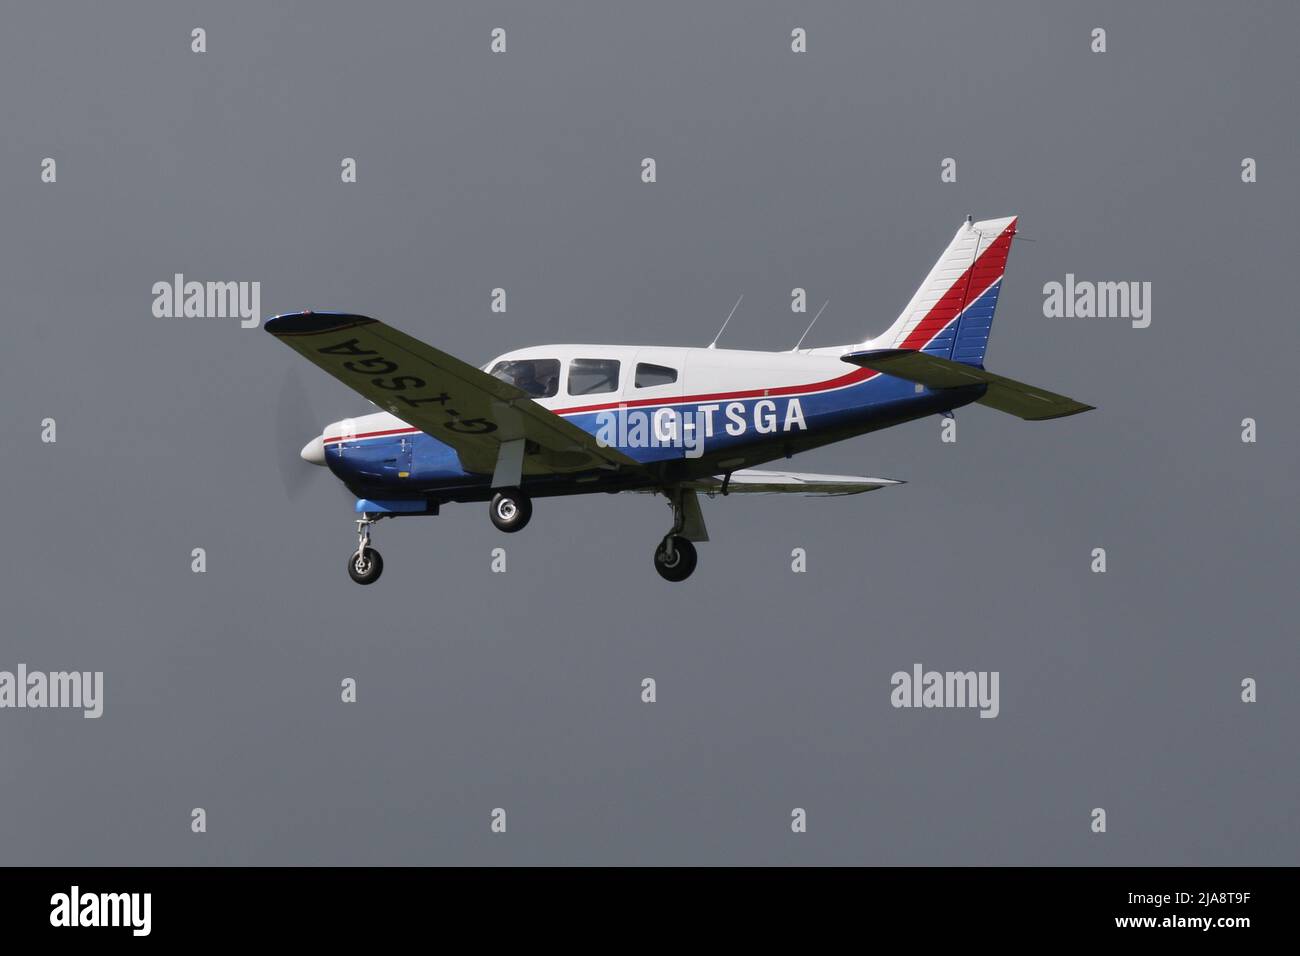 G-TSGA, a privately-owned Piper PA-28R-201 Arrow III, arriving at Prestwick International Airport in Ayrshire, Scotland. Stock Photo